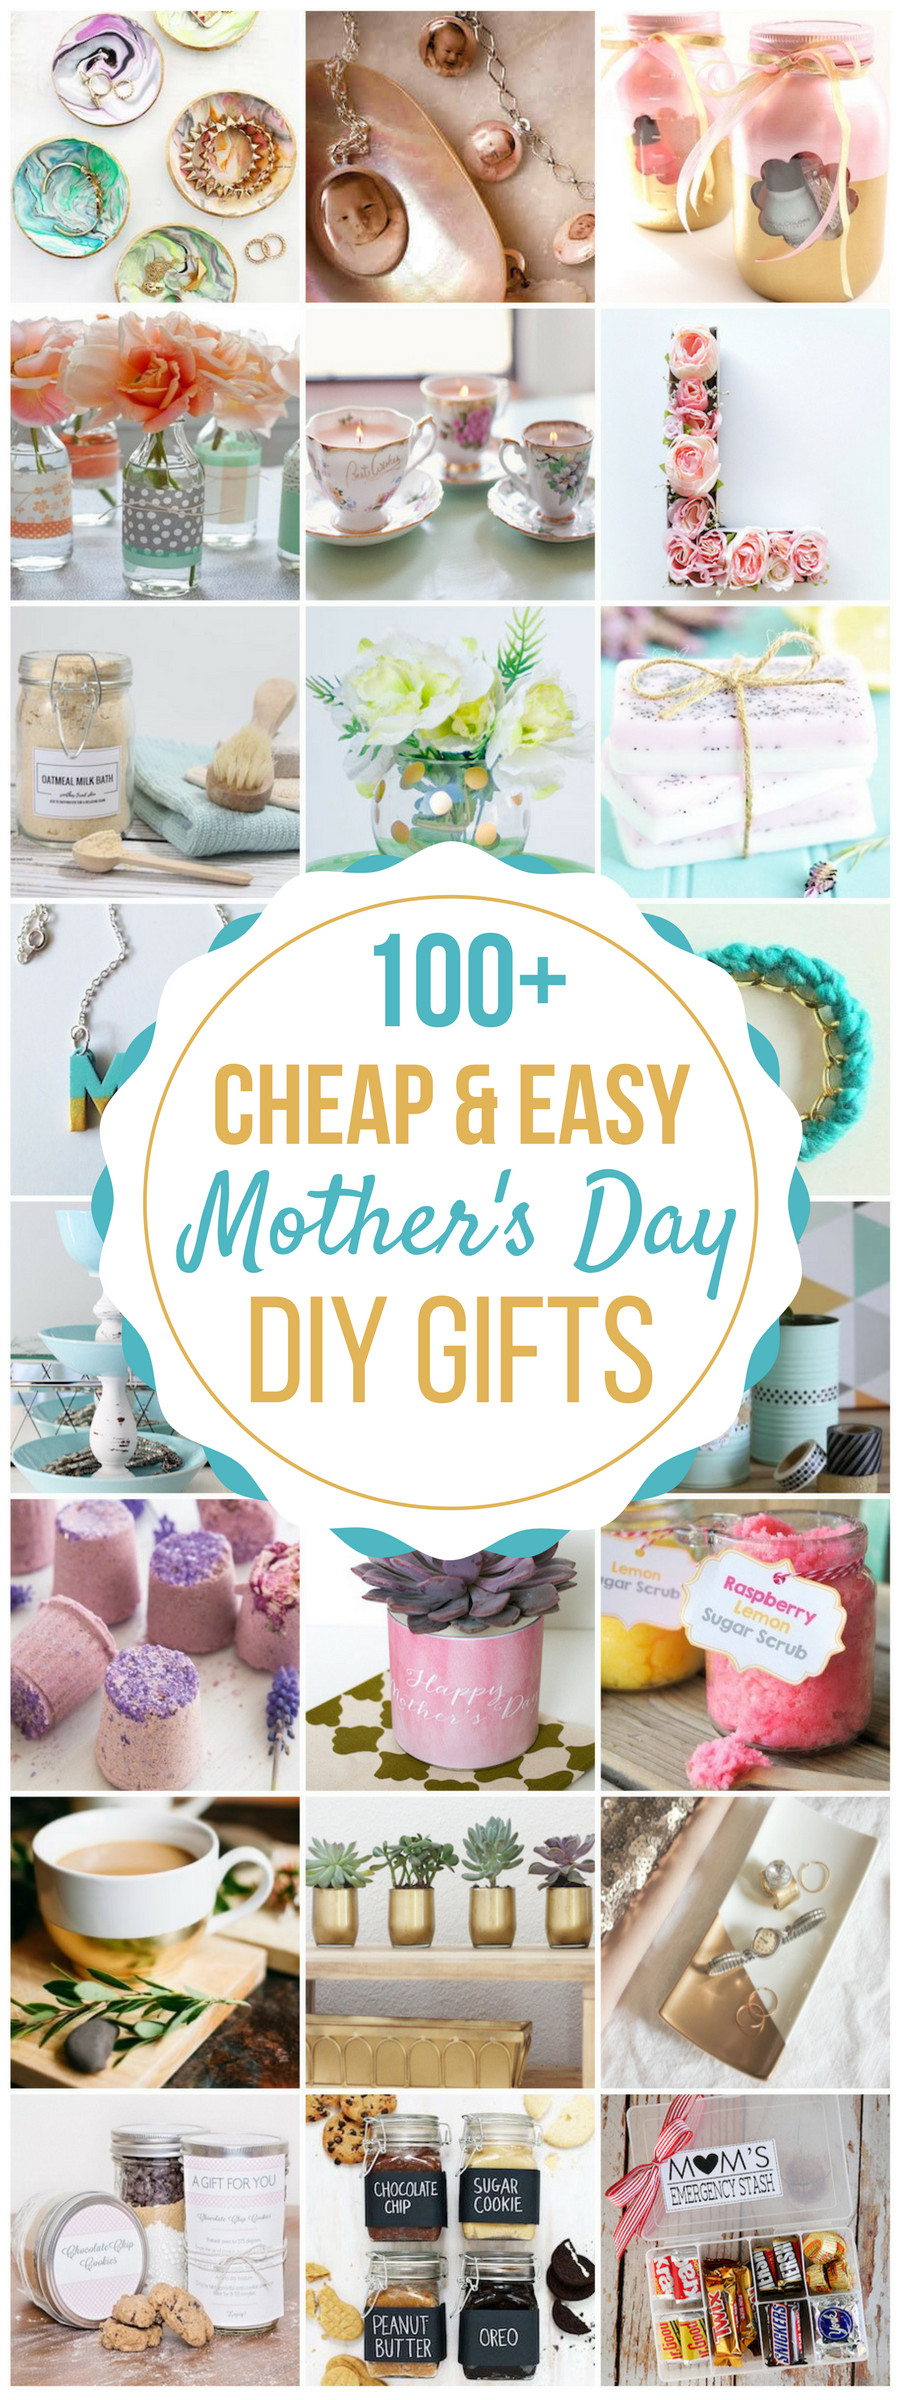 Cheap Mothers Day Gift Ideas
 100 Cheap & Easy DIY Mother s Day Gifts Prudent Penny